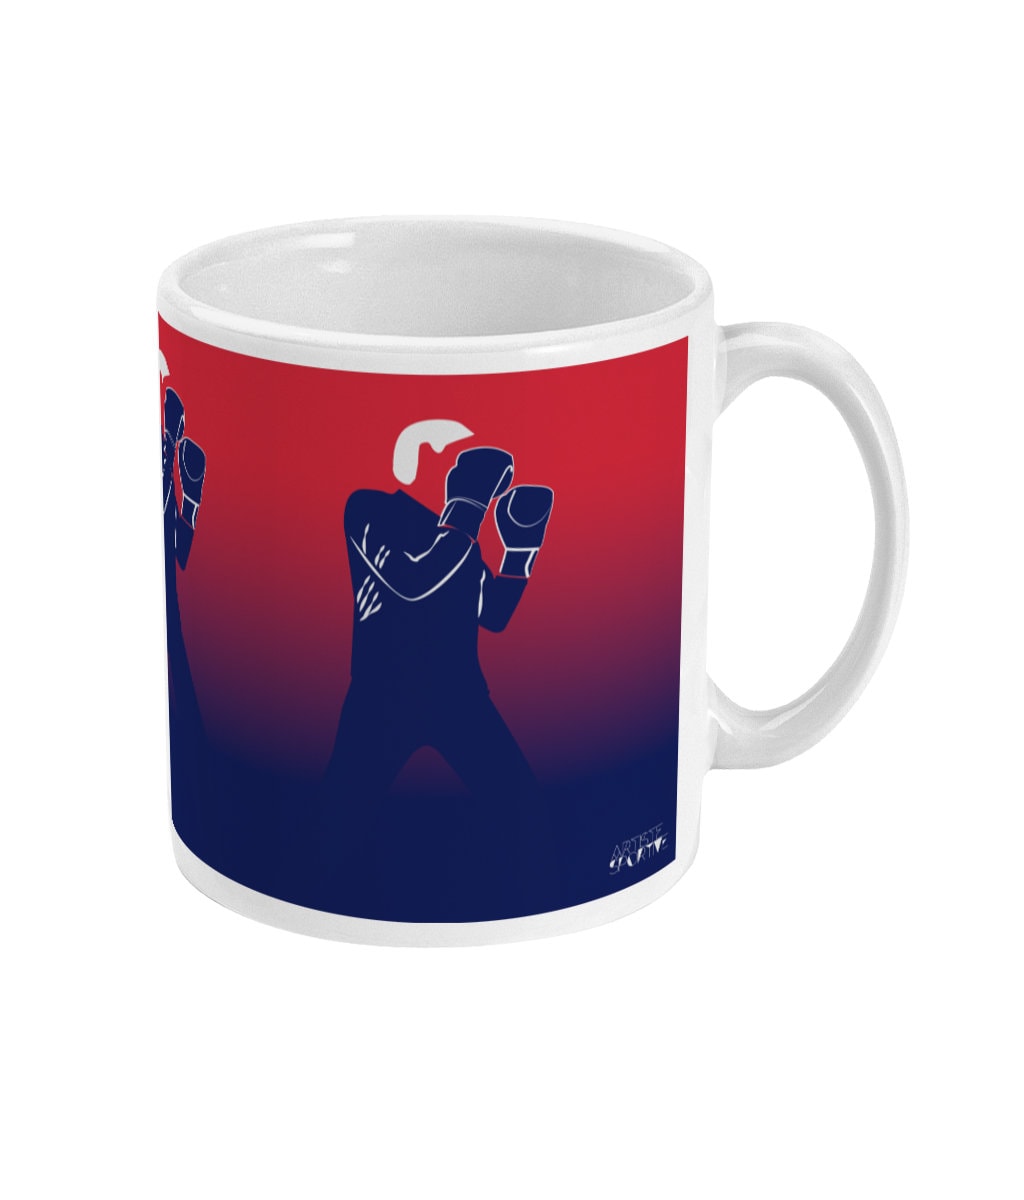 Boxing/boxing cup or mug "On the ring" - Customizable